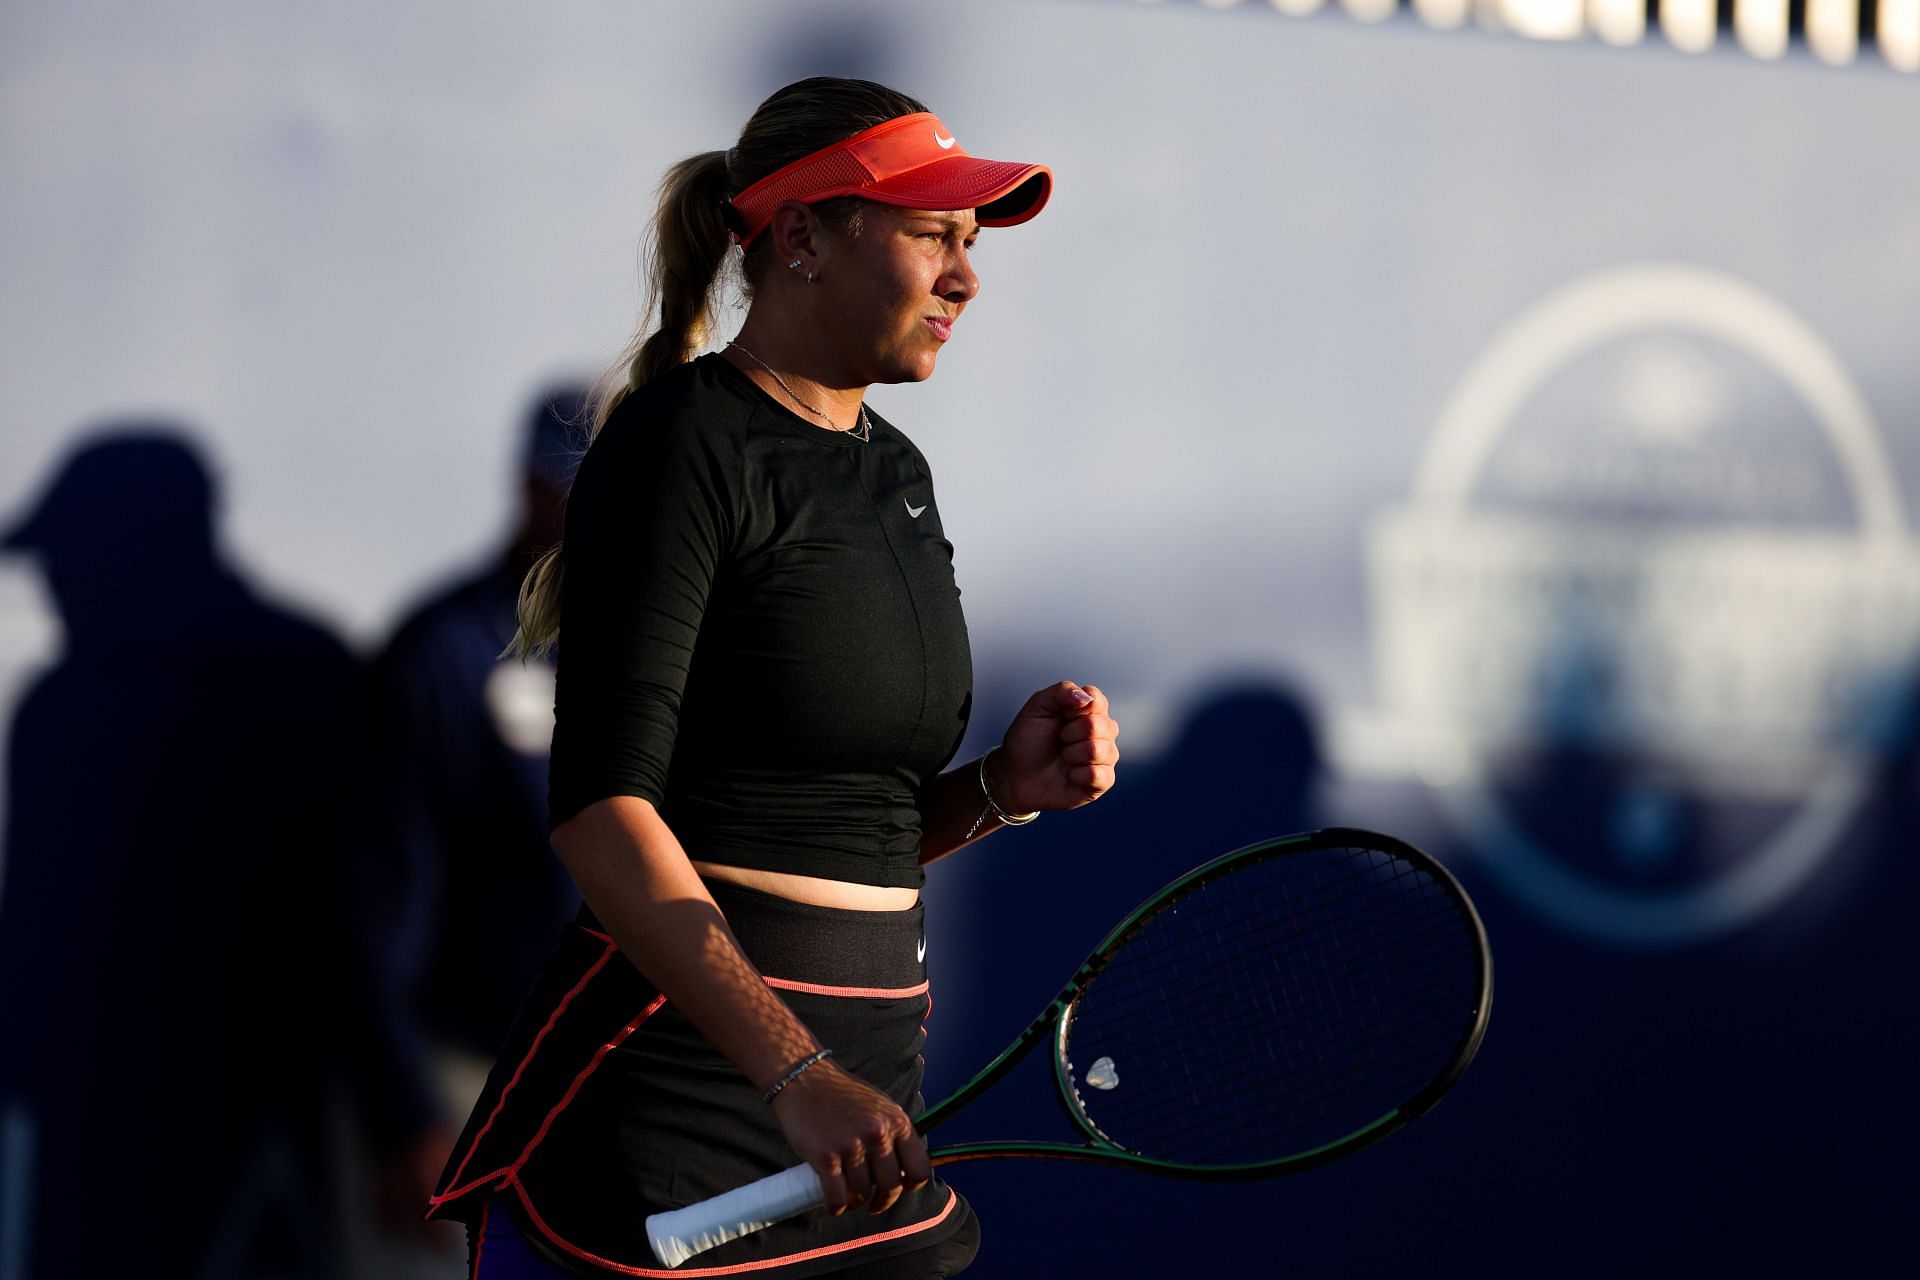 Amanda Anisimova lost in the first round at the US Open on Tuesday.